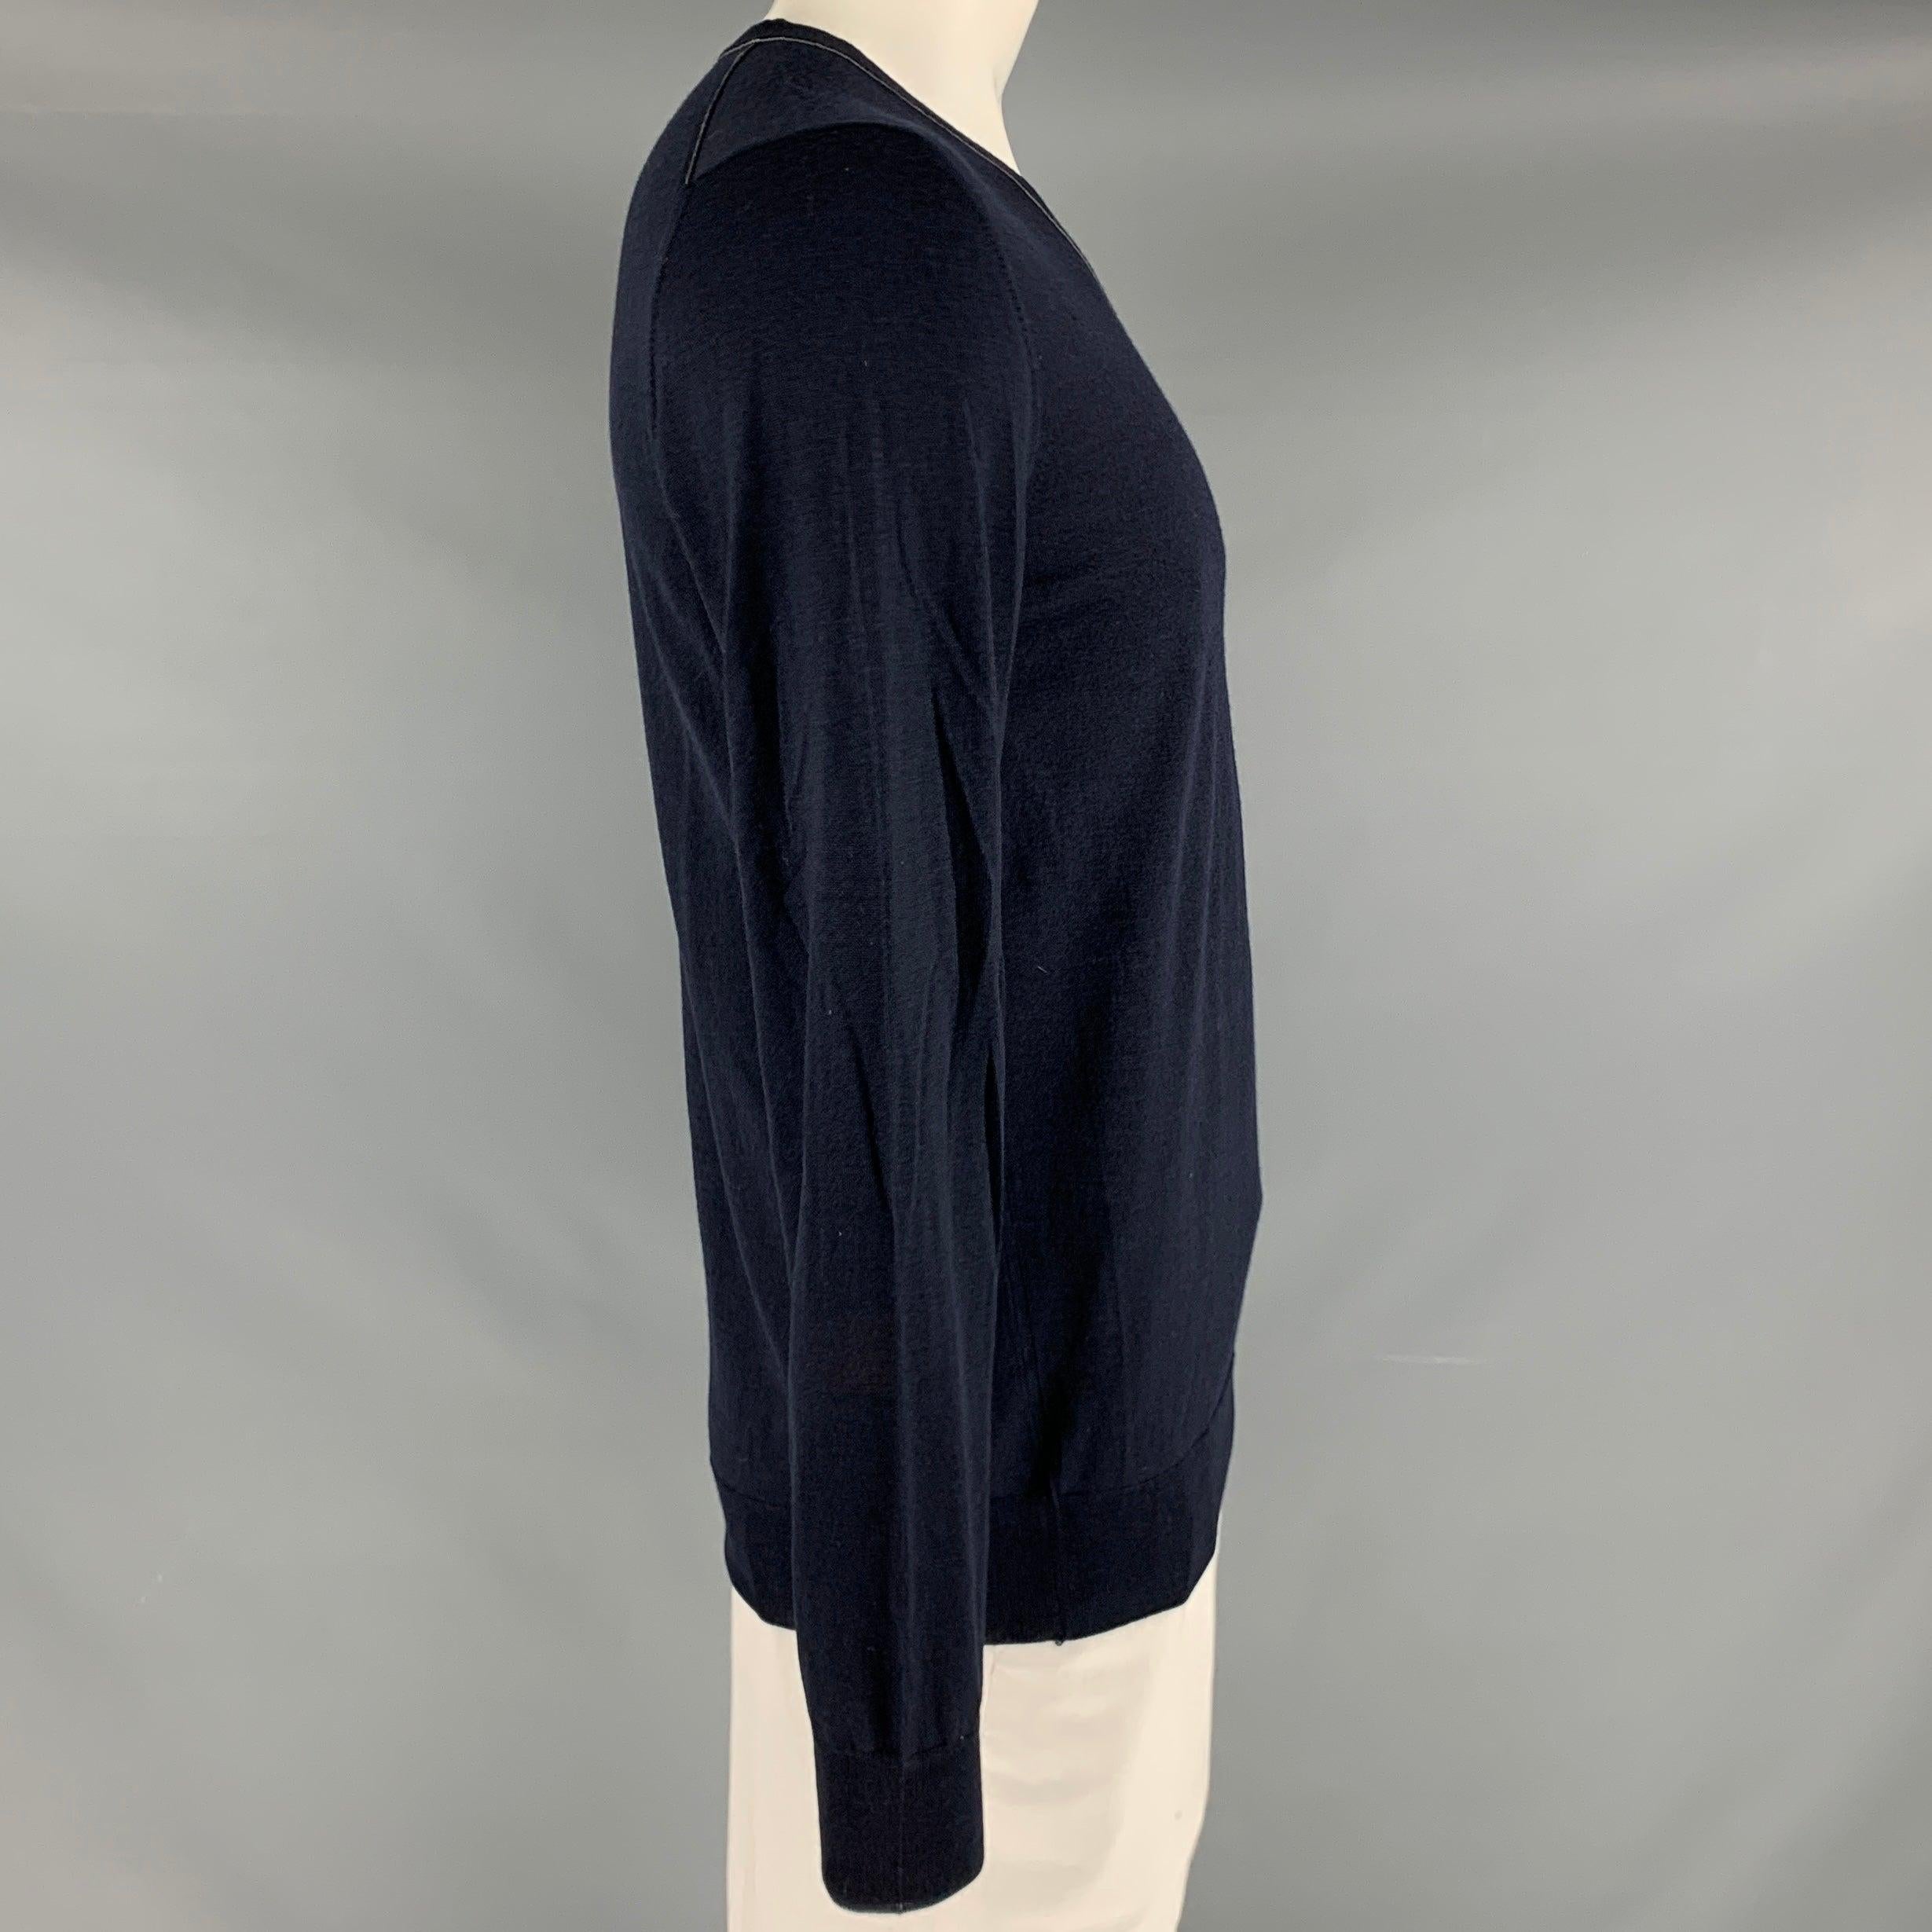 SALVATORE FERRAGAMO pullover
in a navy wool silk blend knit featuring grey trim, blouson sleeves, and V-neck. Made in Italy.Very Good Pre-Owned Condition. Minor signs of wear. 

Marked:   XL 

Measurements: 
 
Shoulder: 17.5 inches Chest: 42 inches